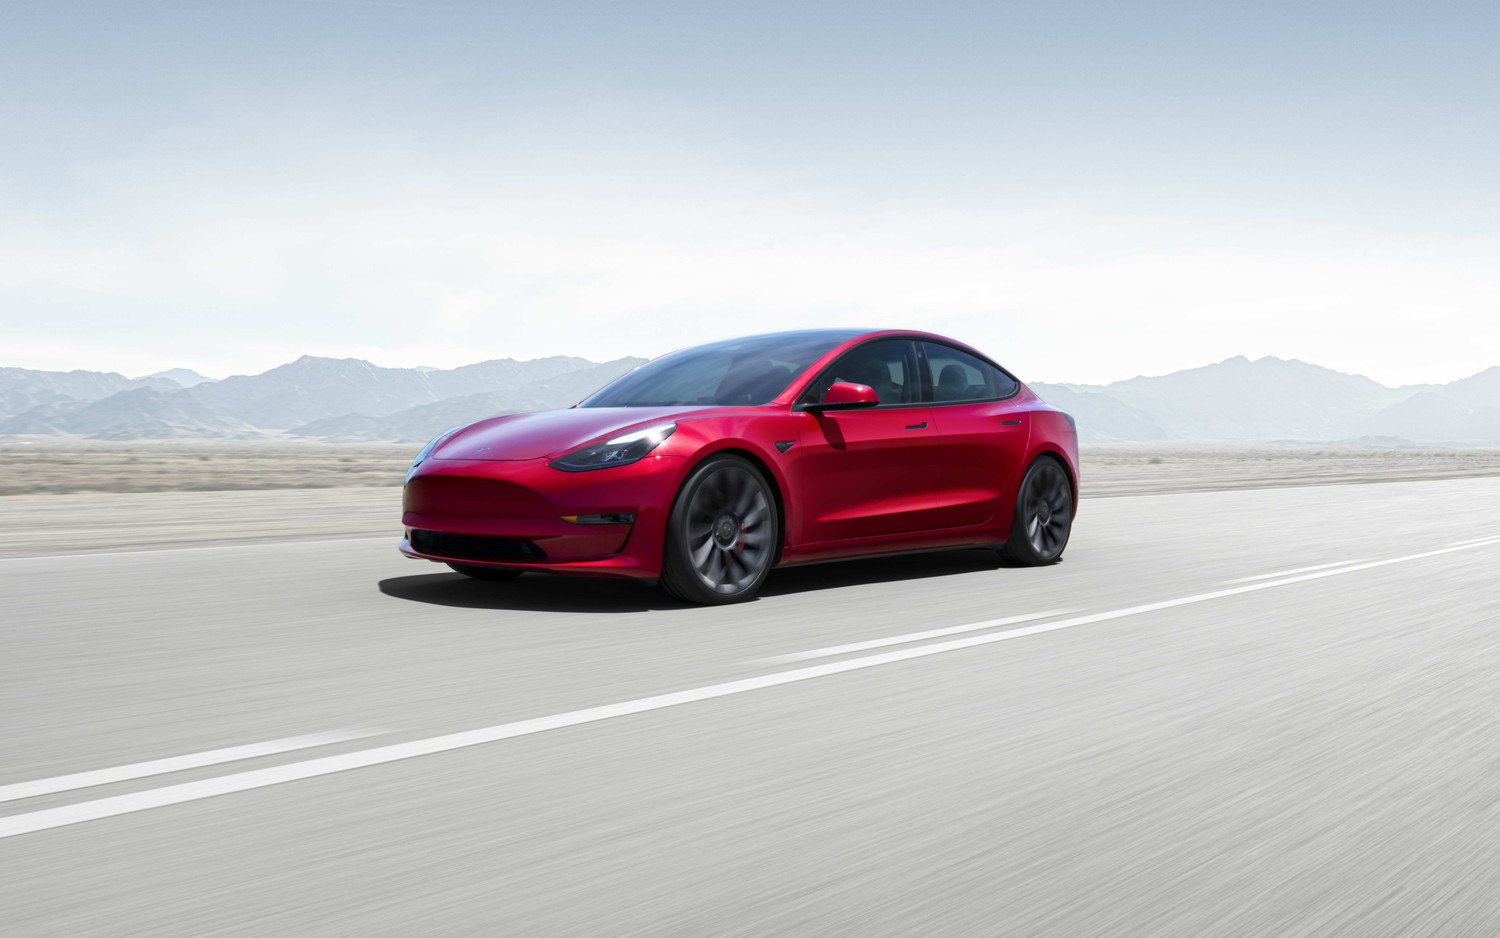 *YMMV* Tesla Model 3 and Model Y: Take delivery between 12/21/2022 and 12/31/2022, and receive $7,500 discount and 10,000 Supercharger credits